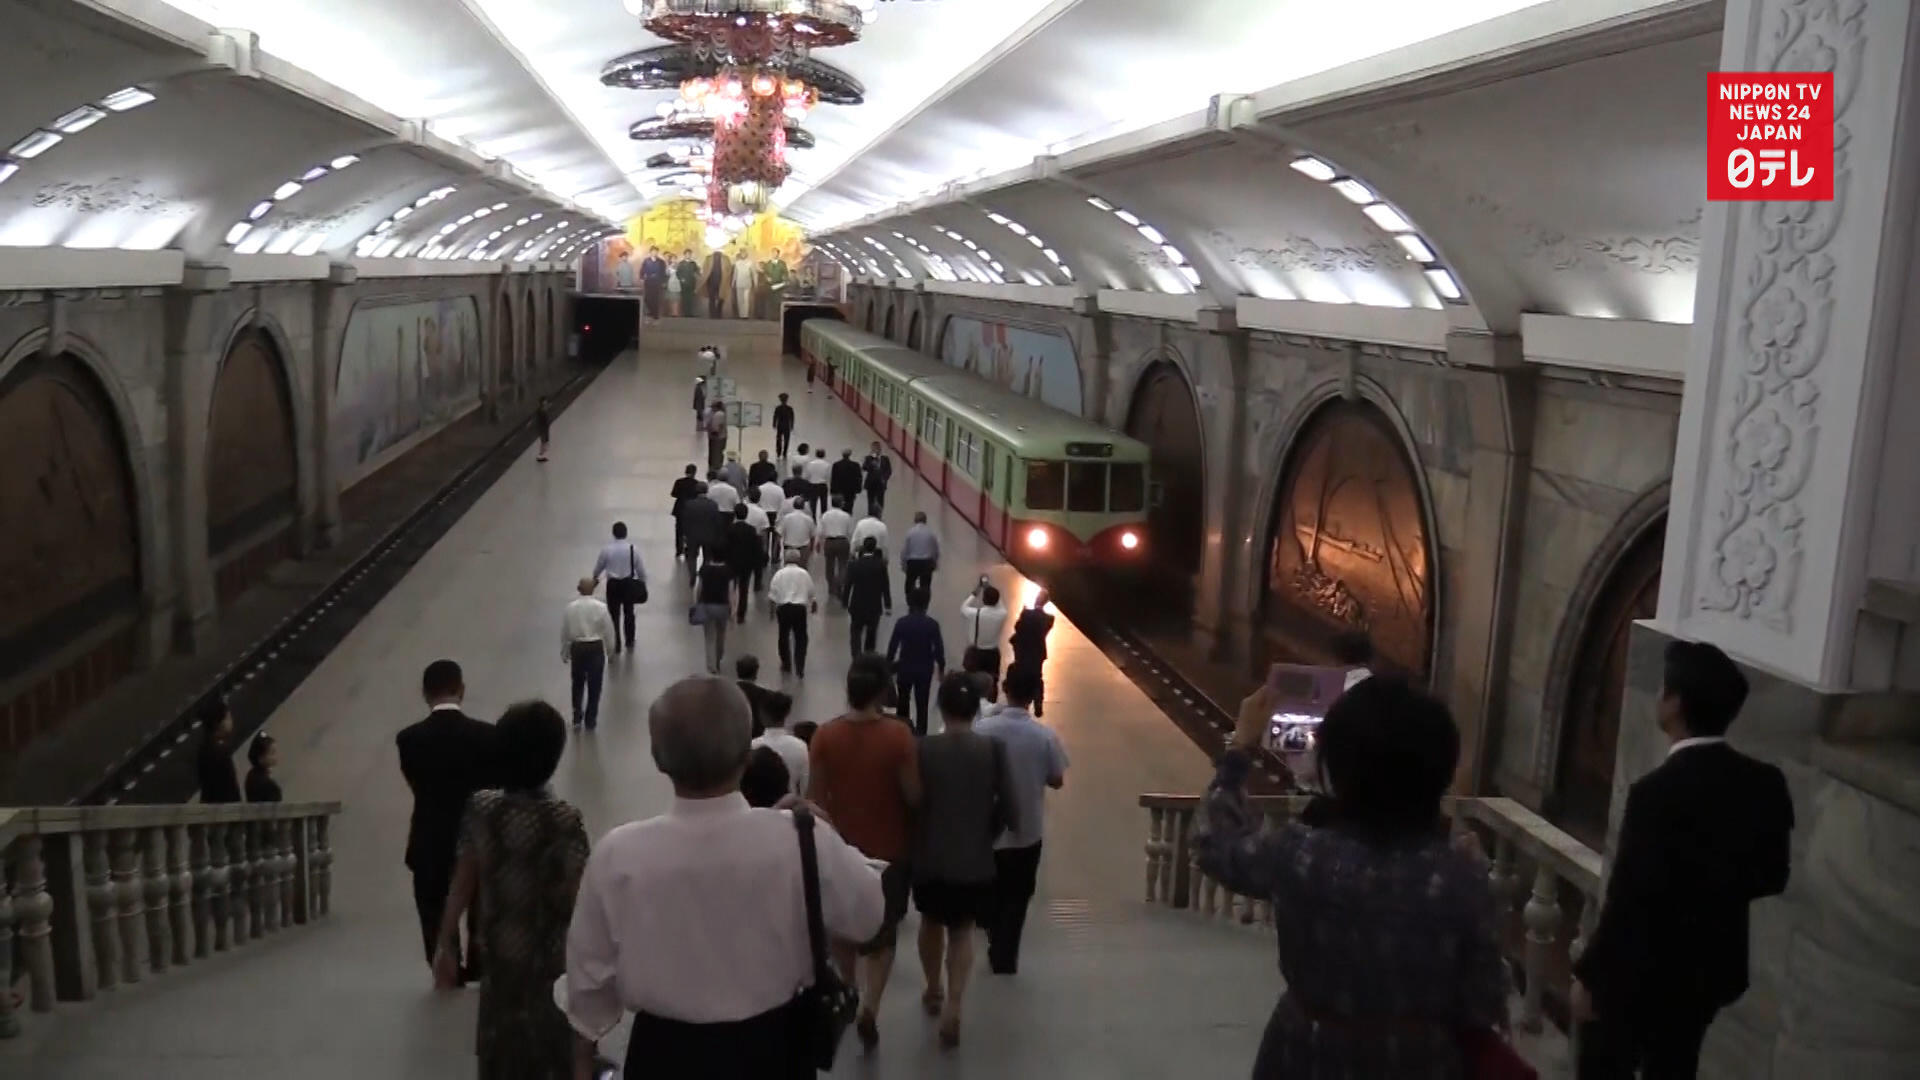 Video of diplomatic ceremony and subway in North Korea